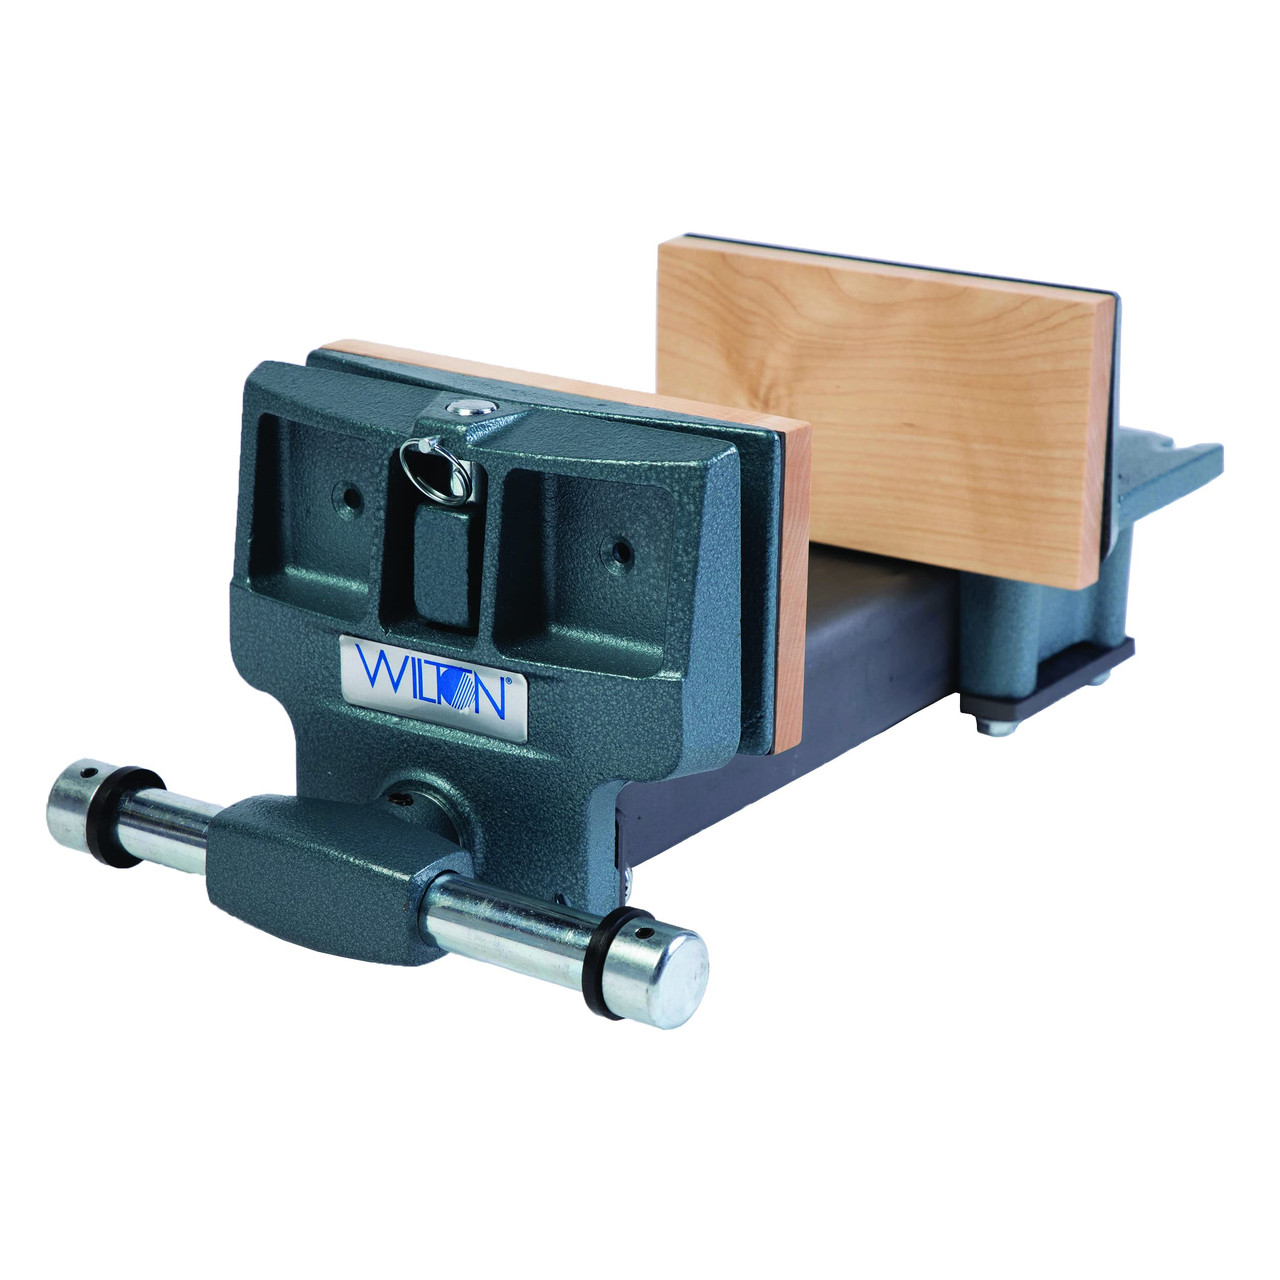 Wilton Pivot Jaw Woodworkers Vise - Rapid Acting, 4" x 7" Jaw